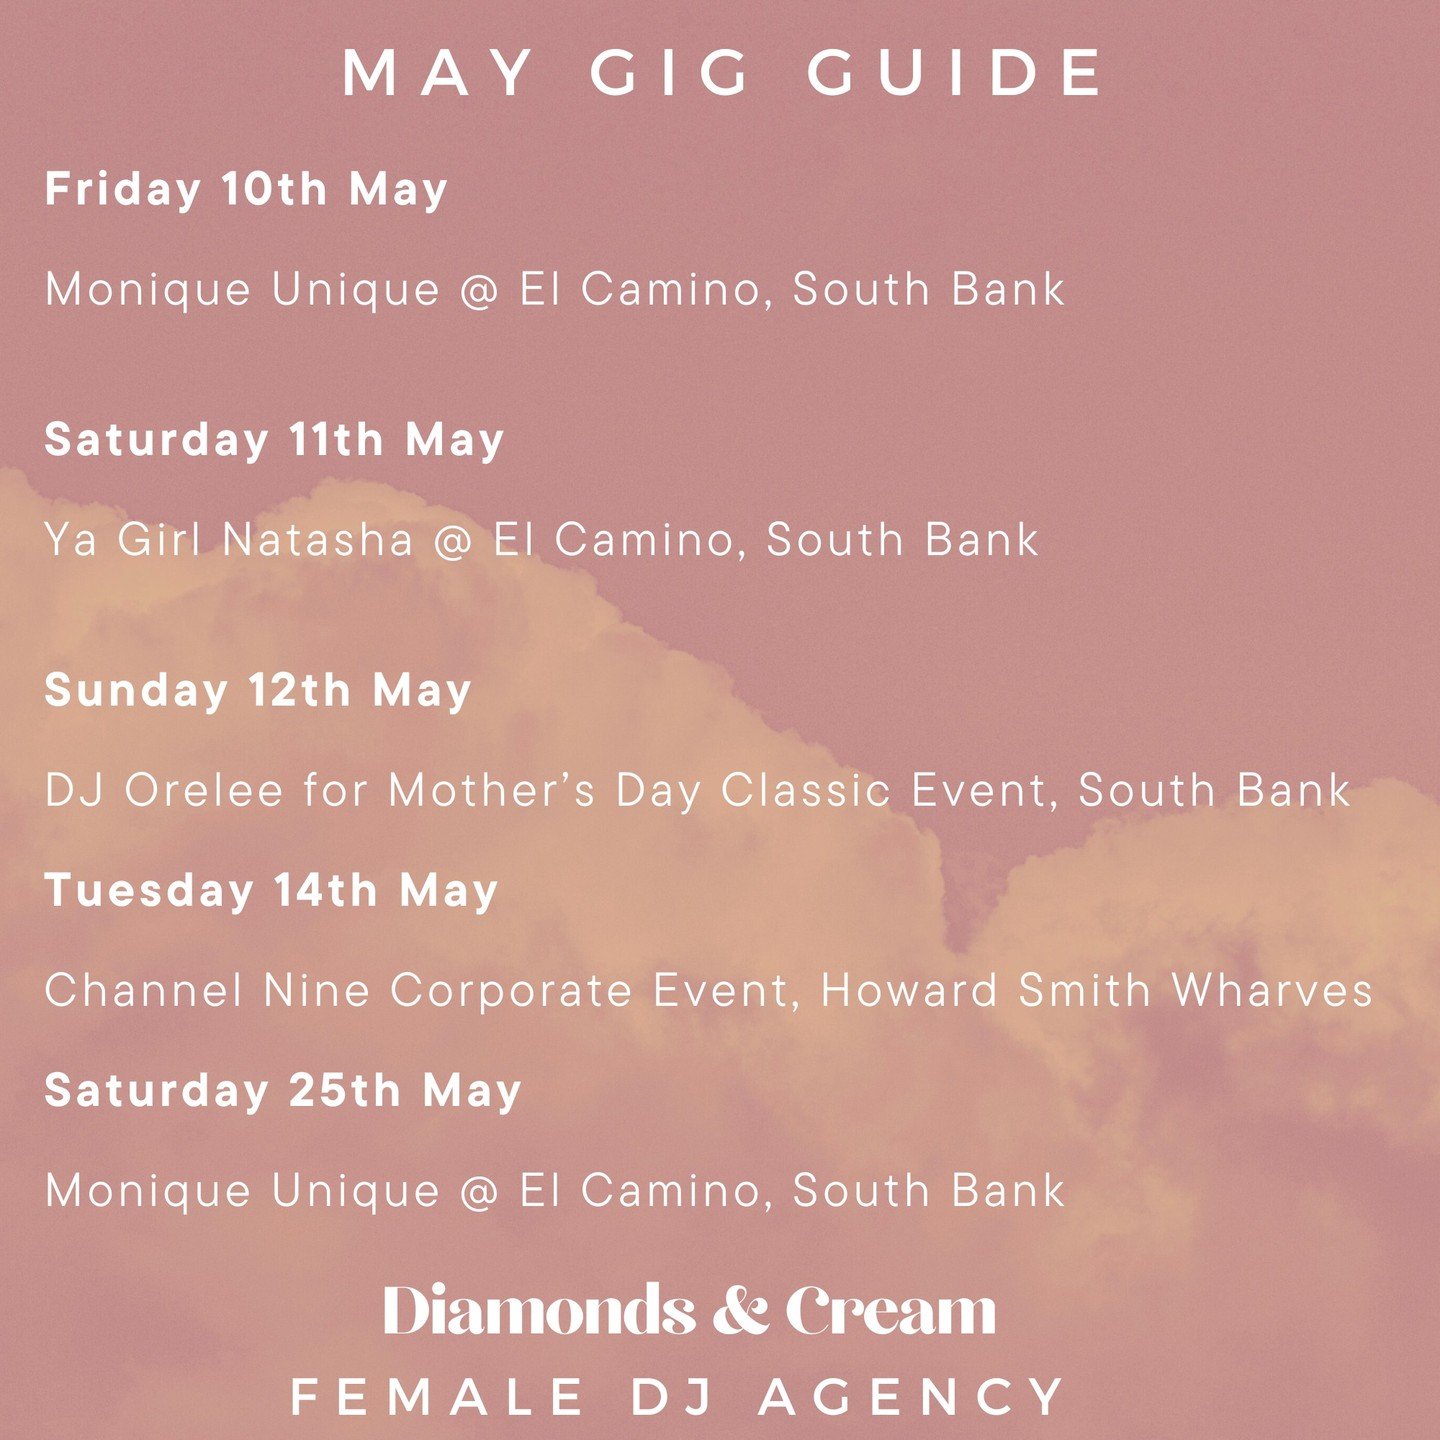 A busy month for the DJ's!
Featuring Ya Girl Natasha and Monique @ El Camino, South Bank. Orelee performing for the Mother's Day Classic Running event &amp; working with Channel Nine again at Howard Smith Wharves. Let's go!